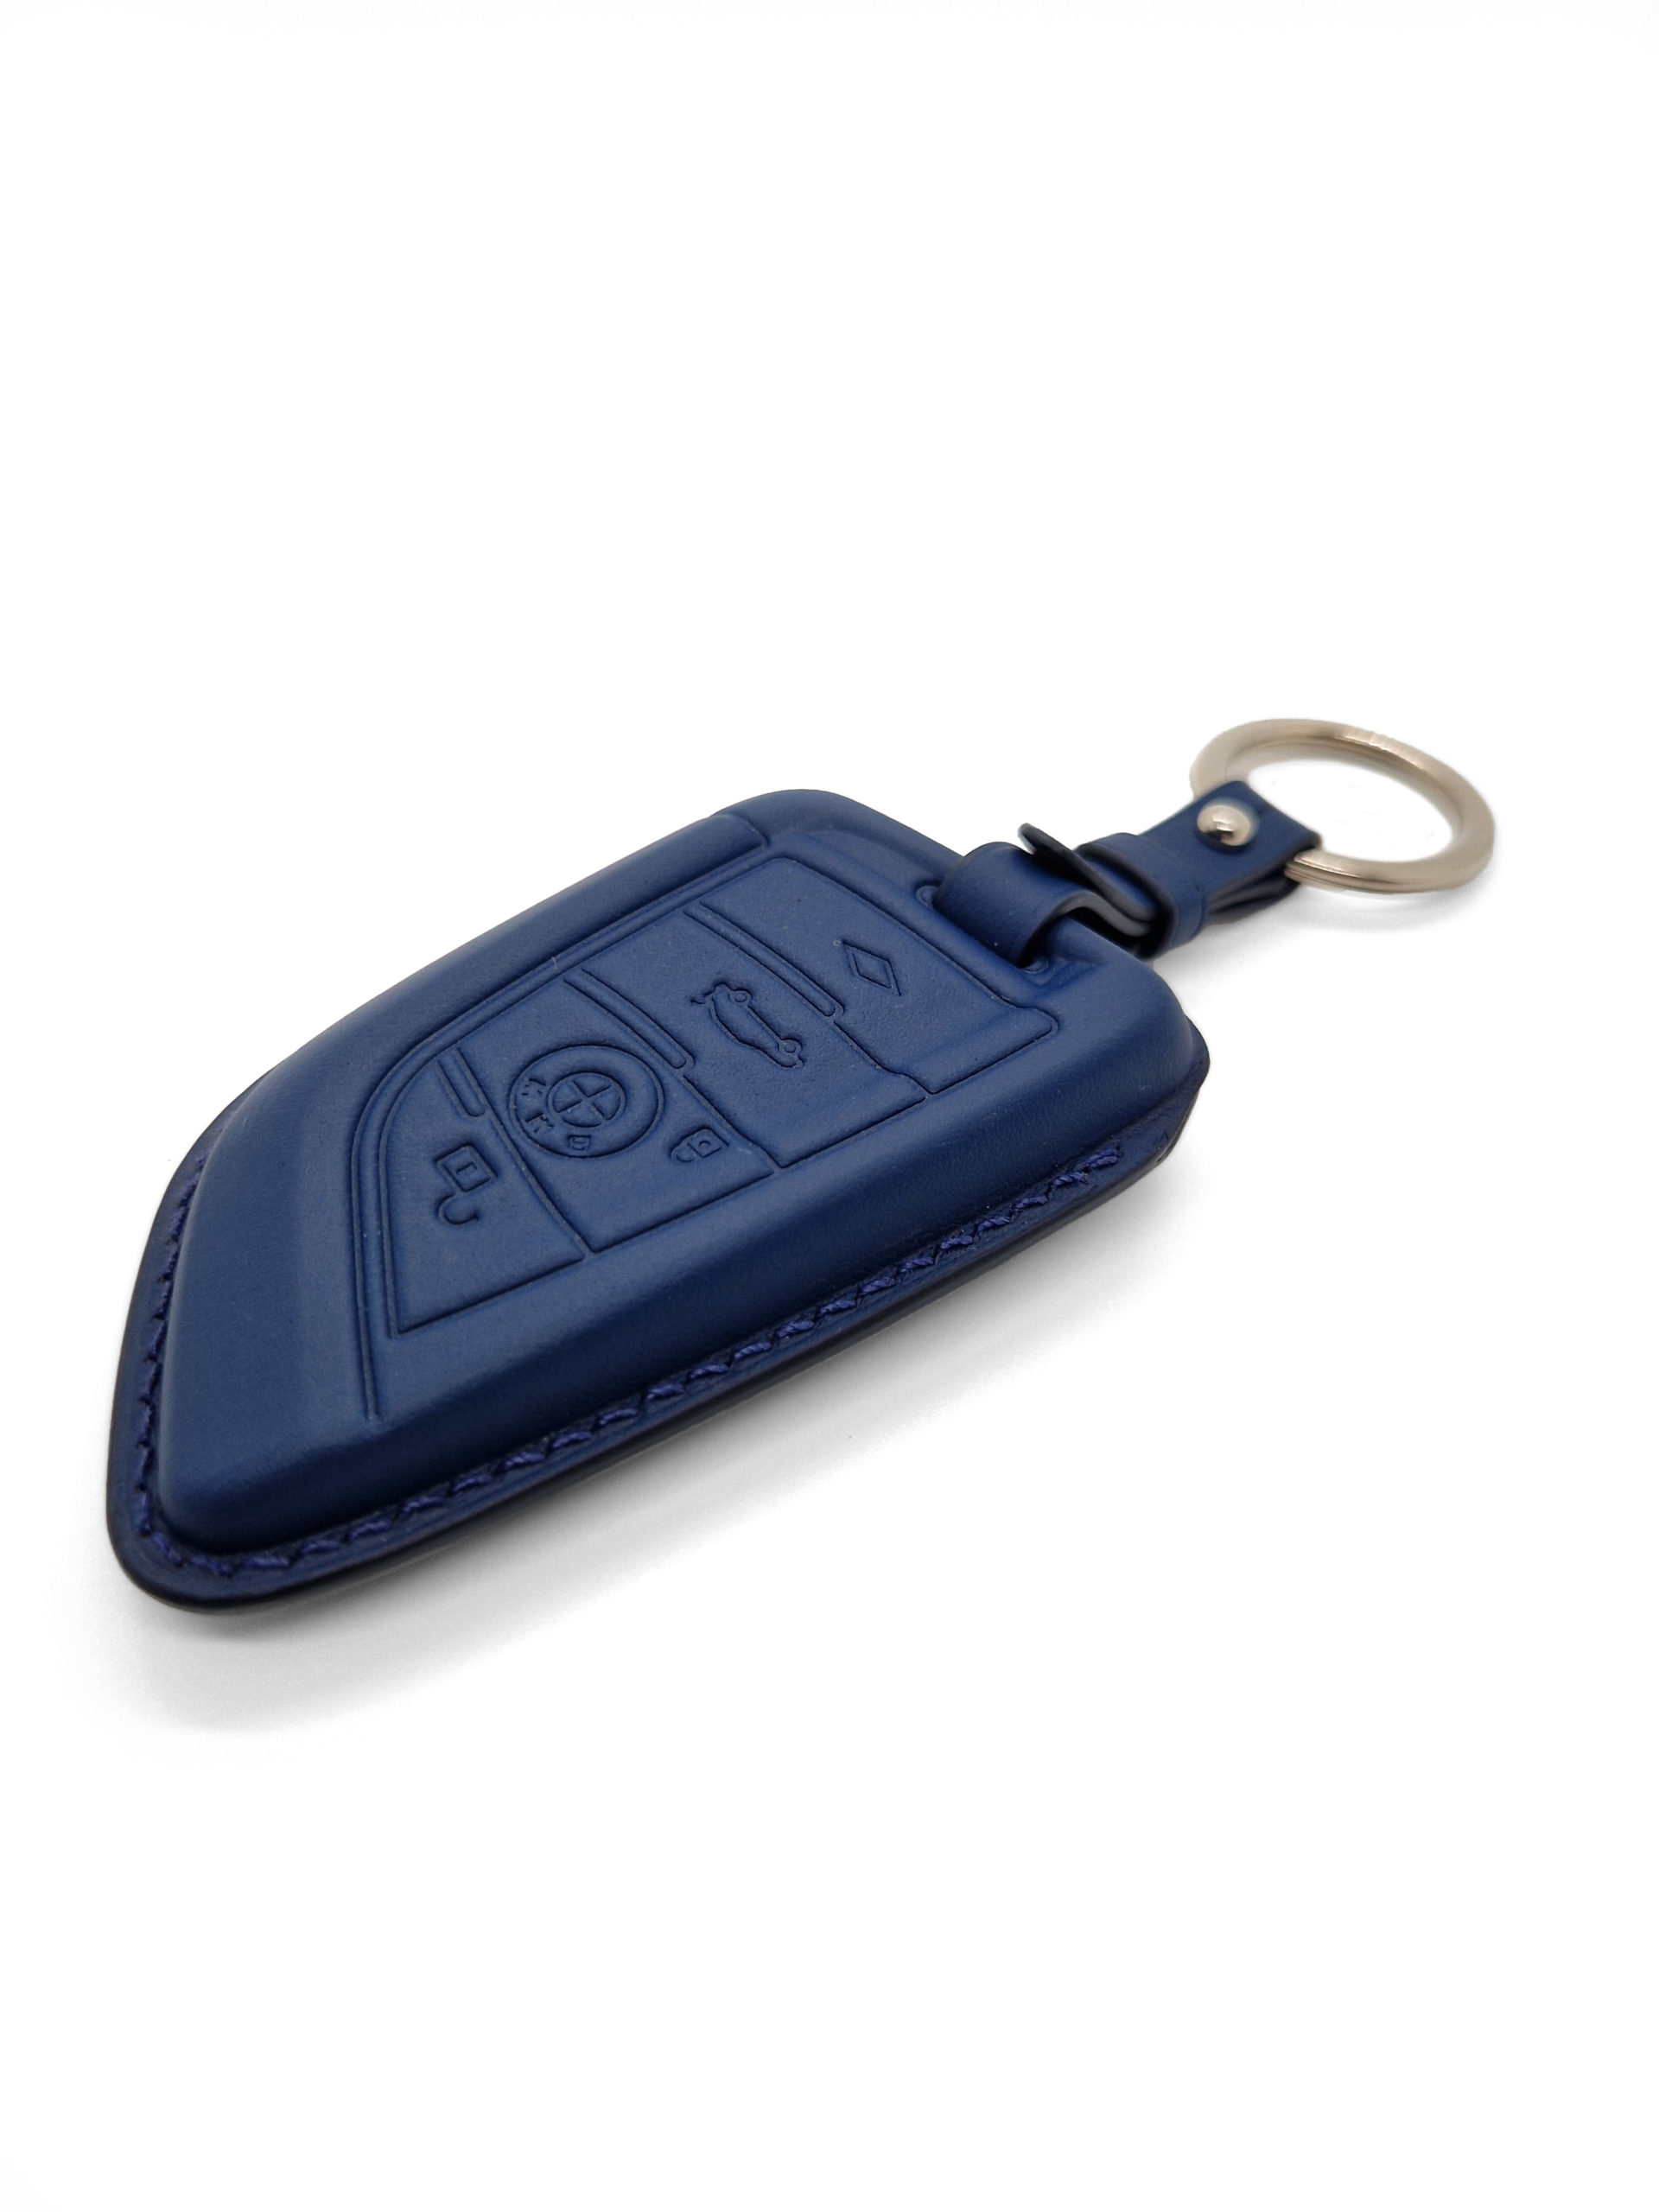 BMW leather key pouch B2-AV5 - Timotheus Switzerland - handmade key pouch  in leather for your car